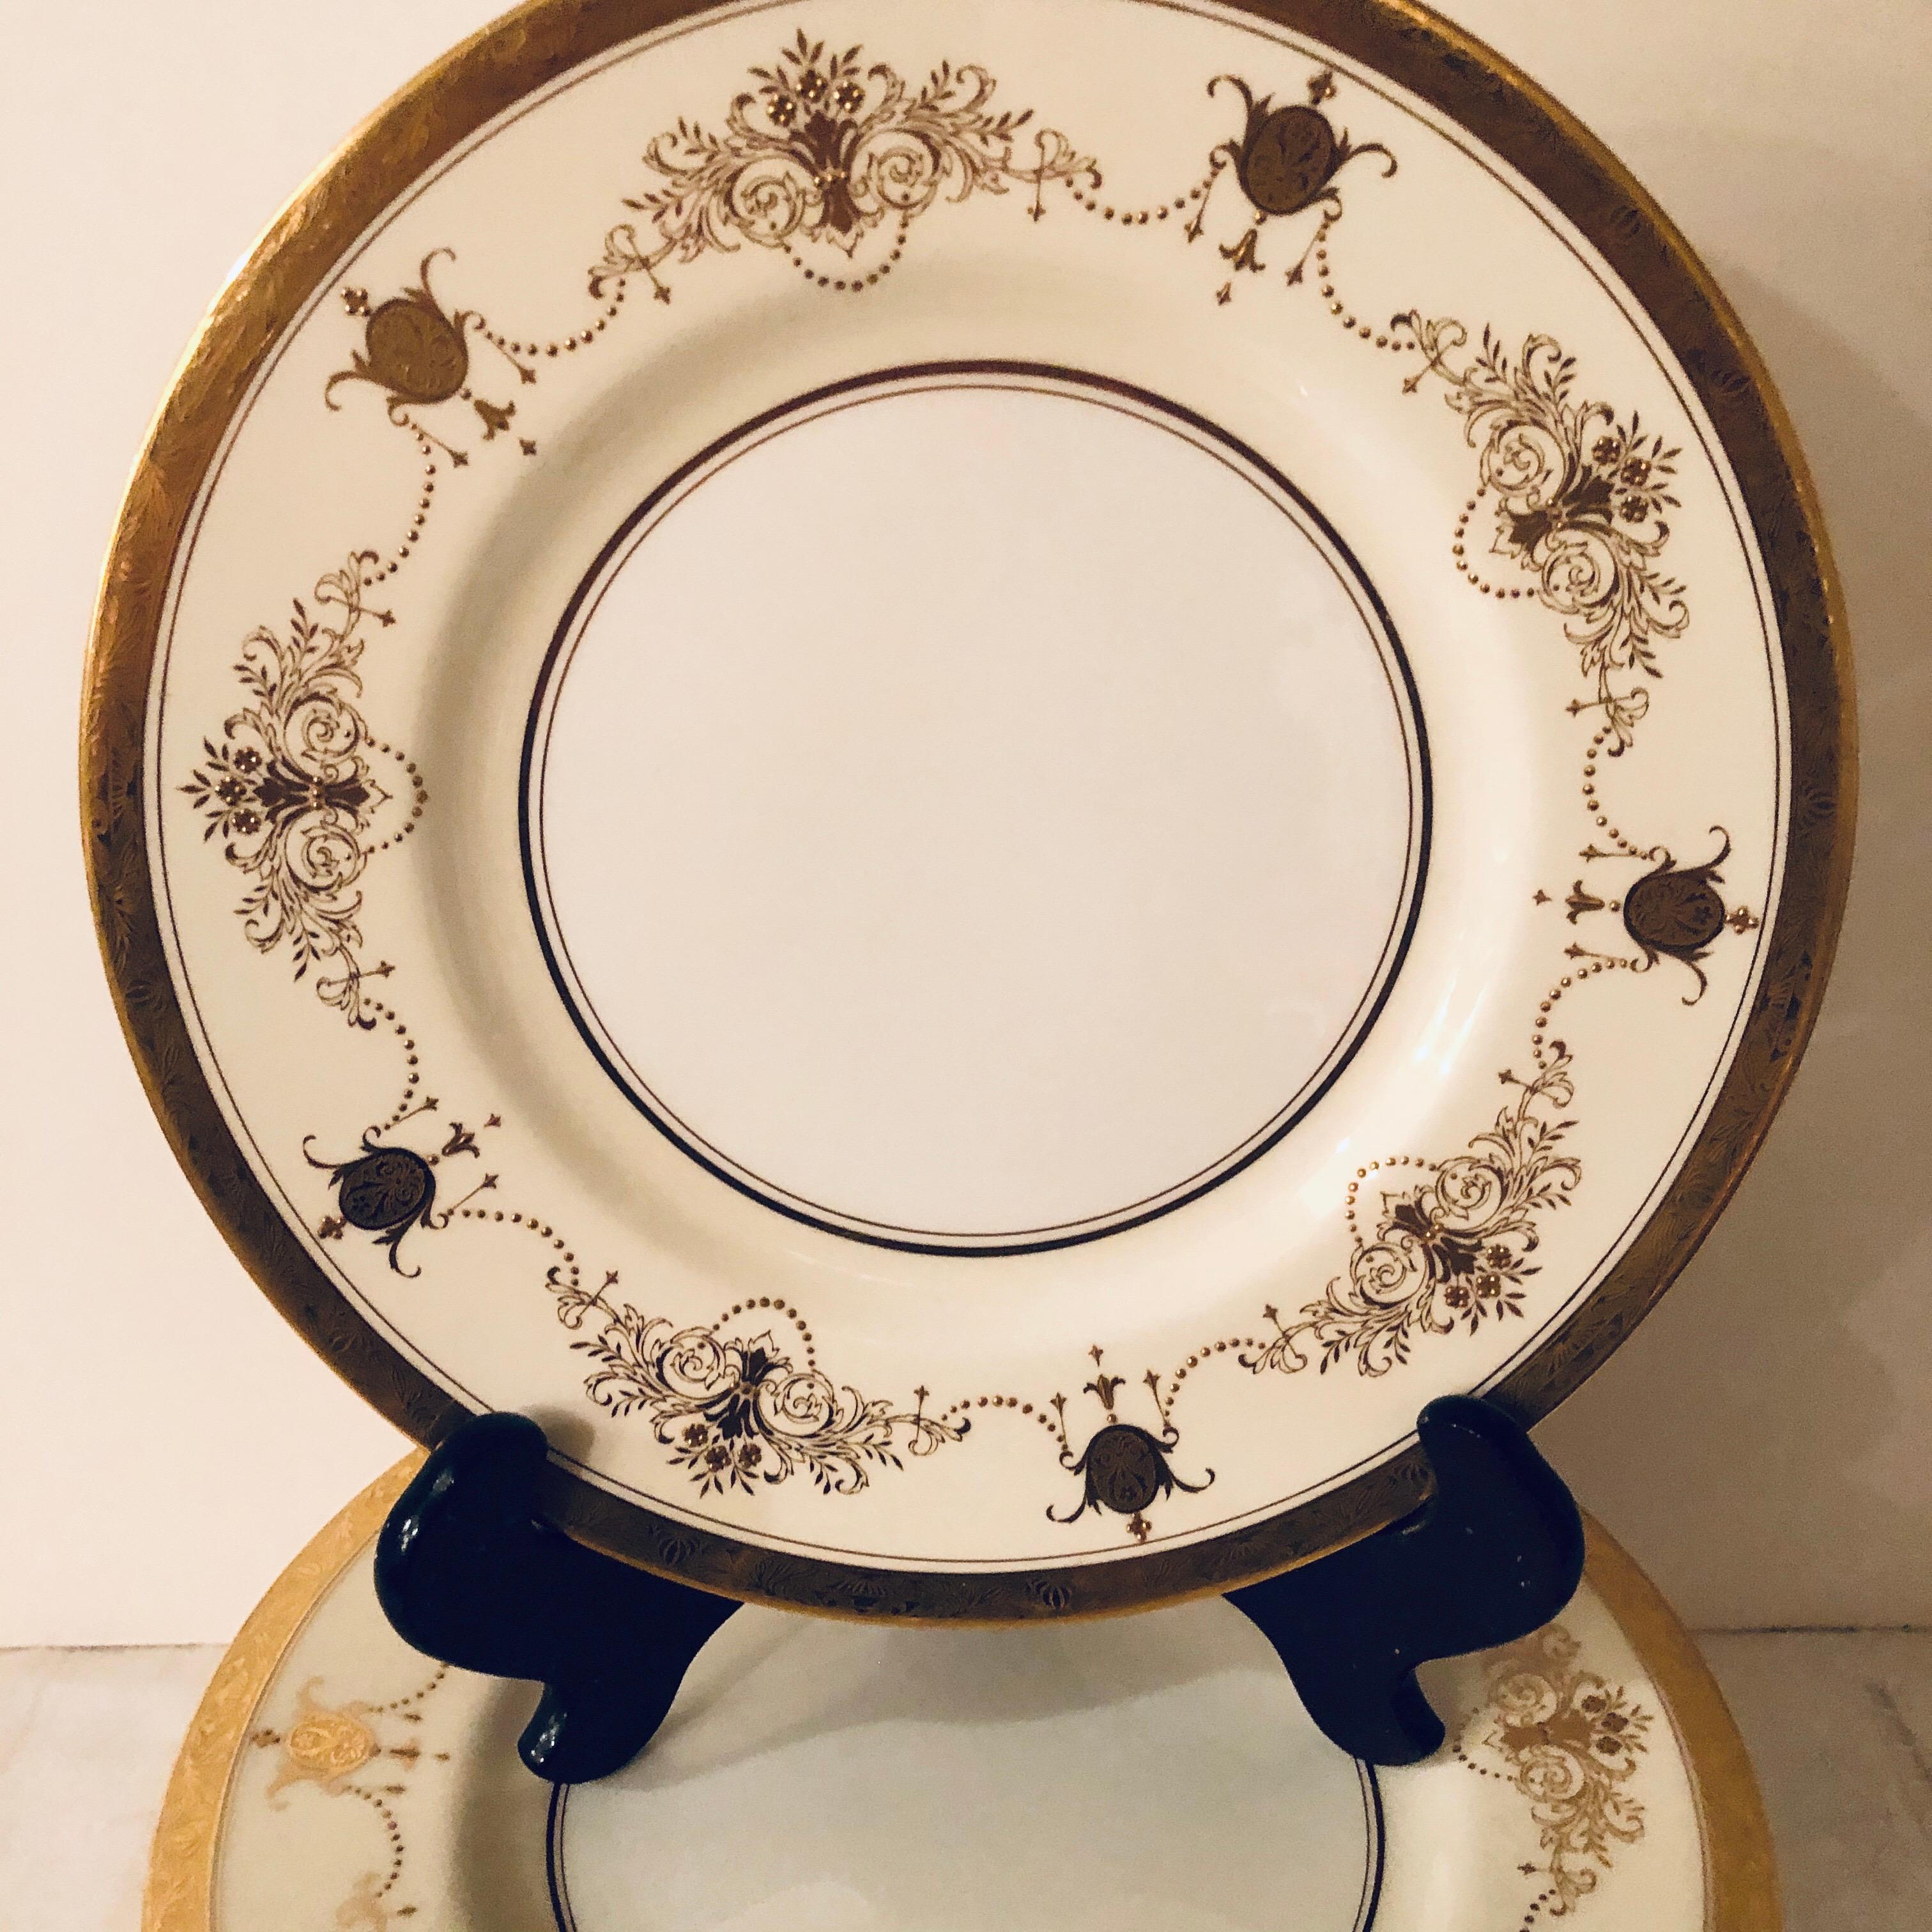 Set of 12 Minton Dinner Plates Decorated with Ribbons of Raised Gilded Jeweling For Sale 3